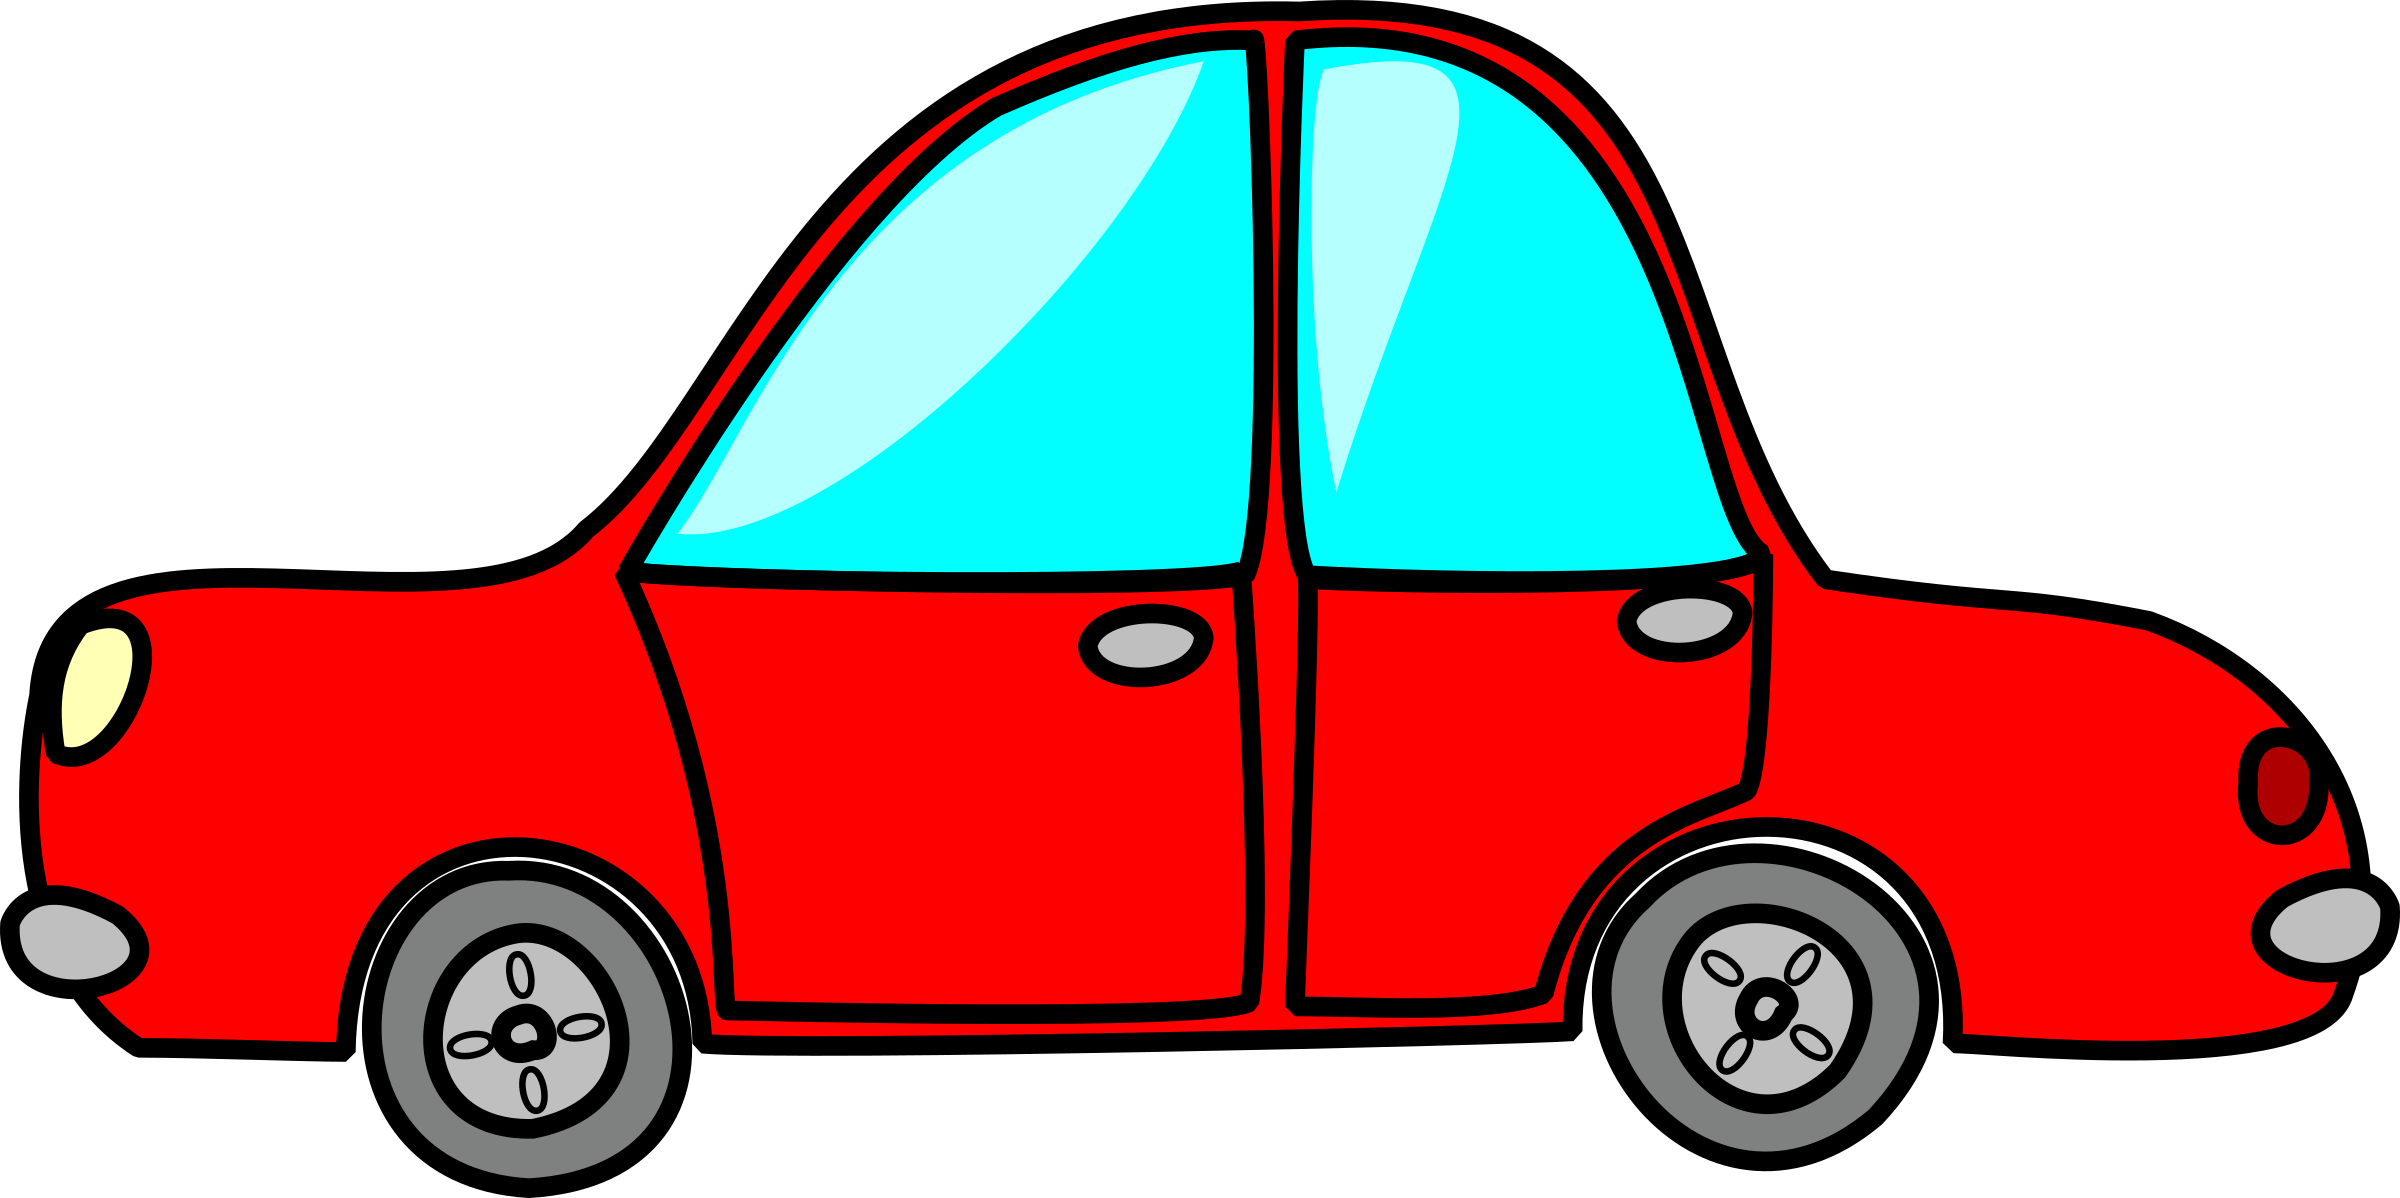 Blue Toy Car PNG - 143416